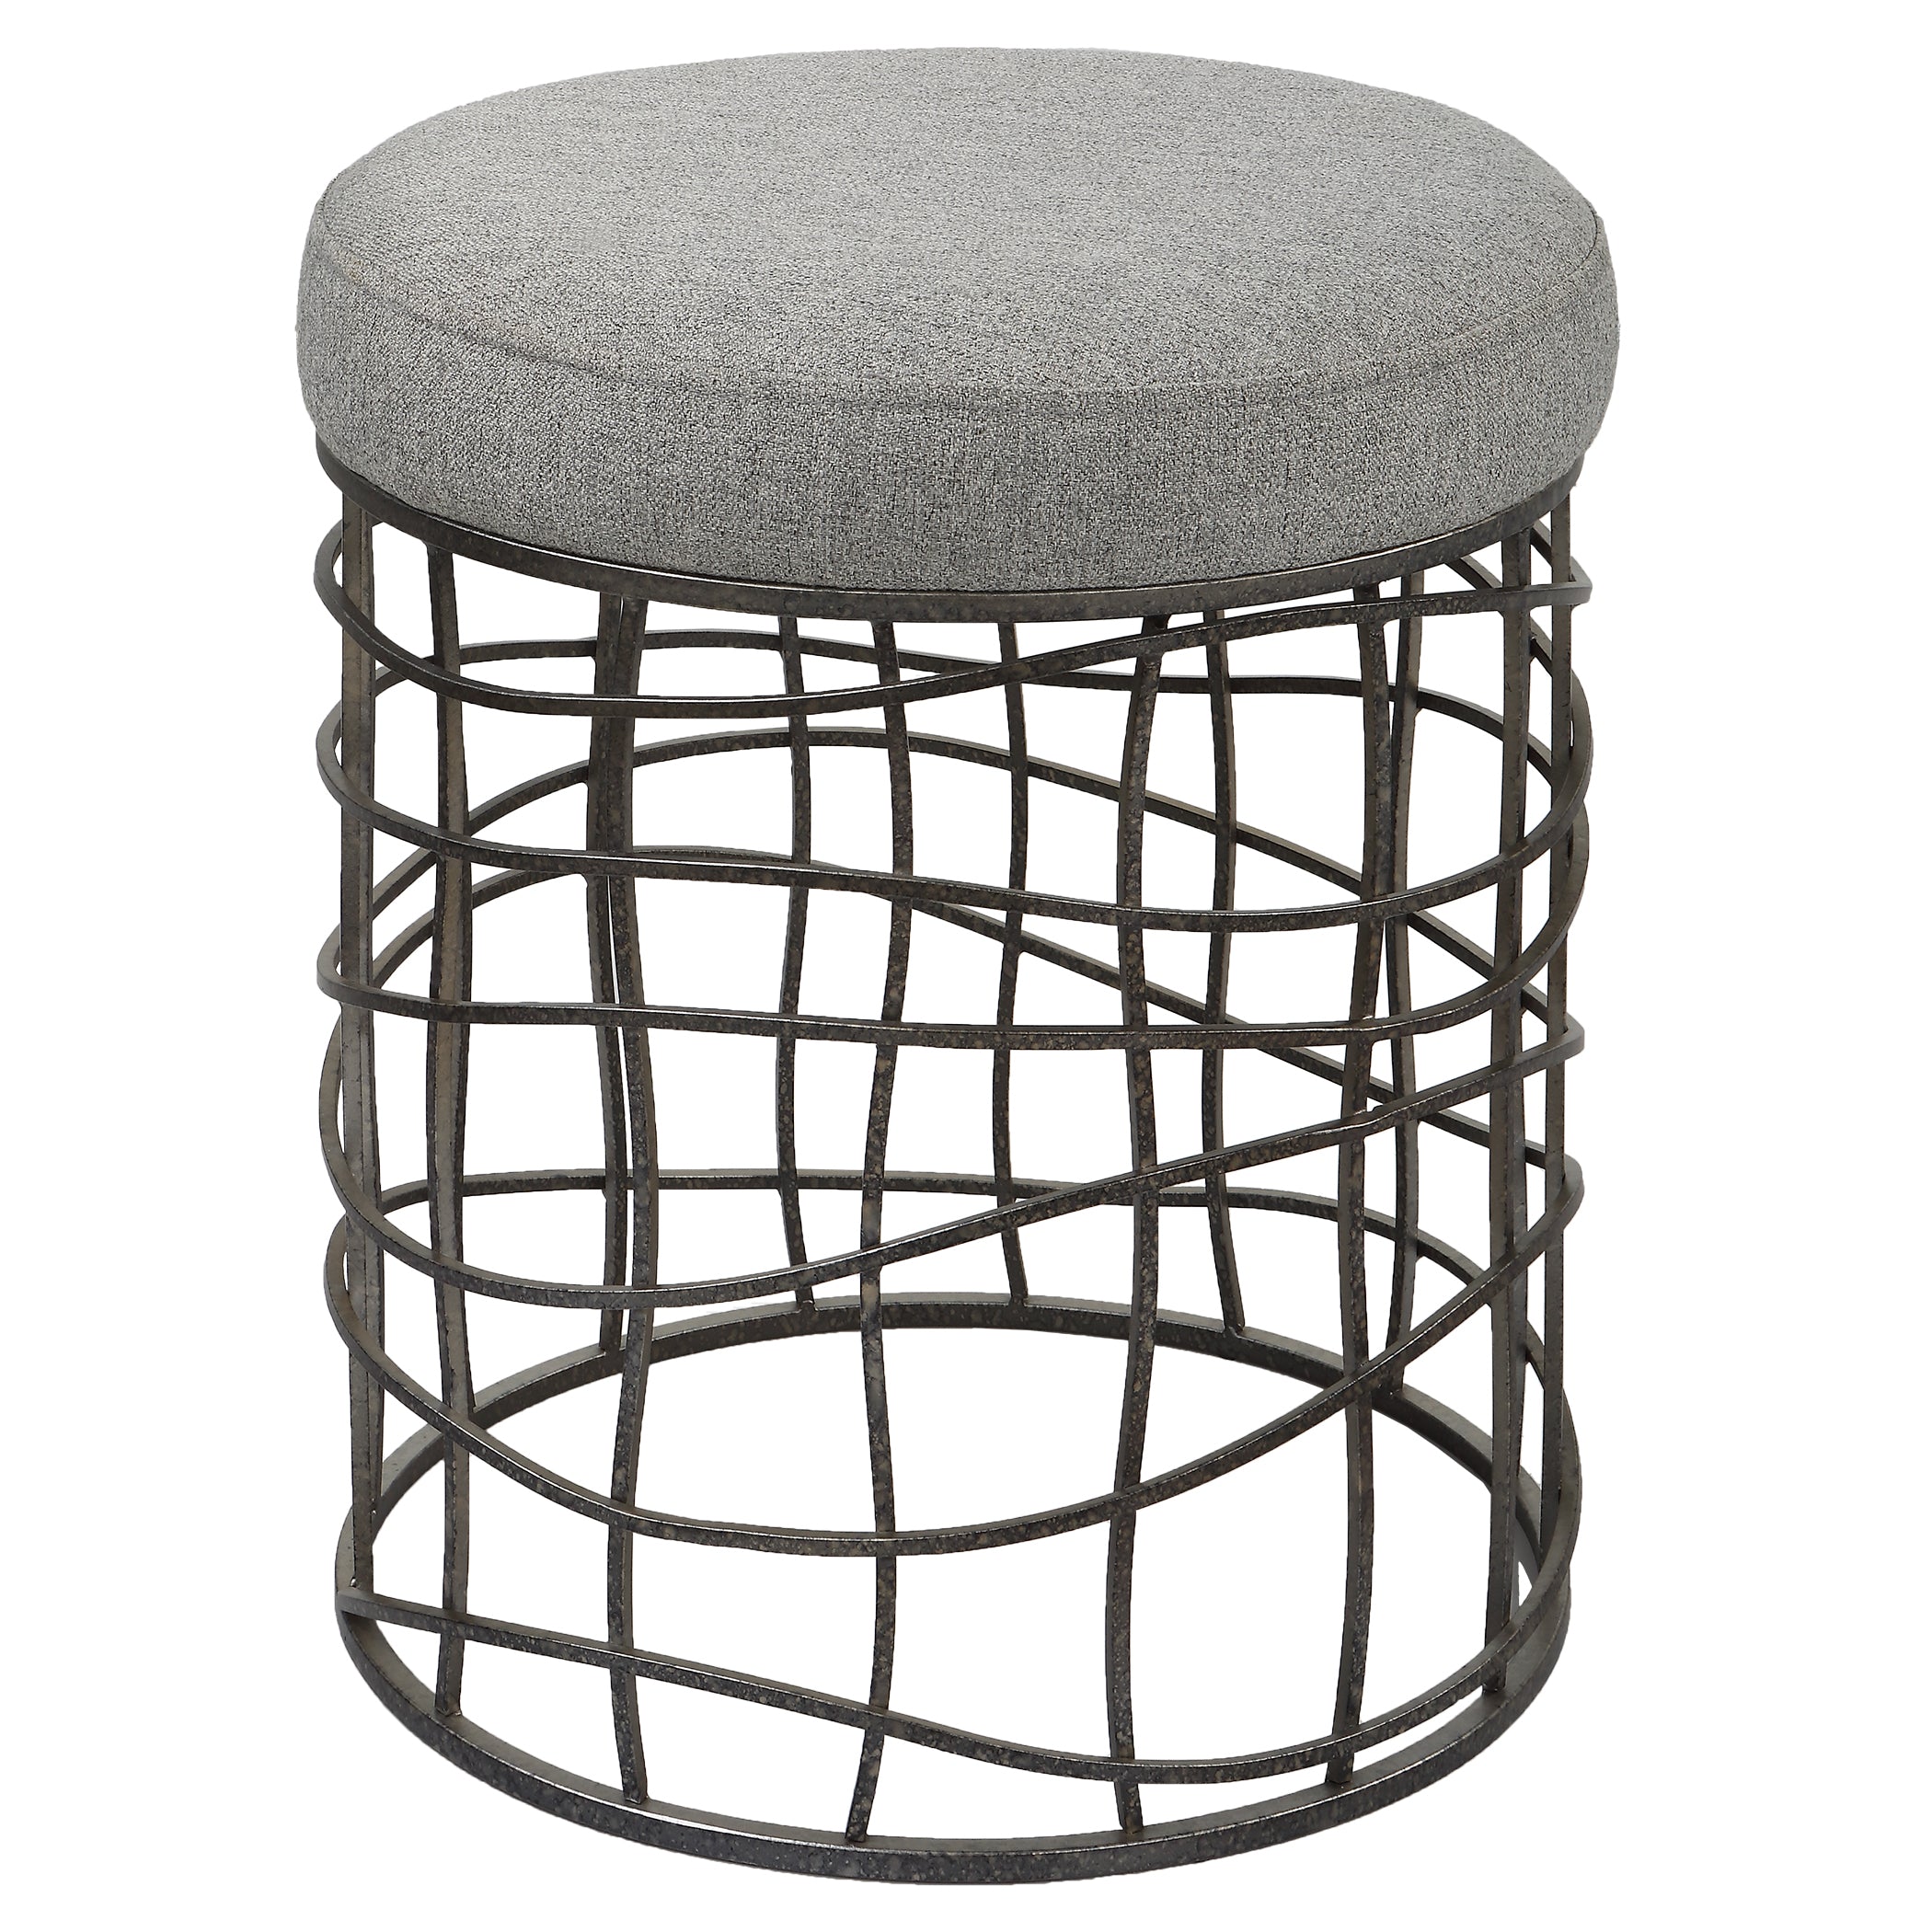 Uttermost Carnival  Accent Stools Accent Stools Uttermost   